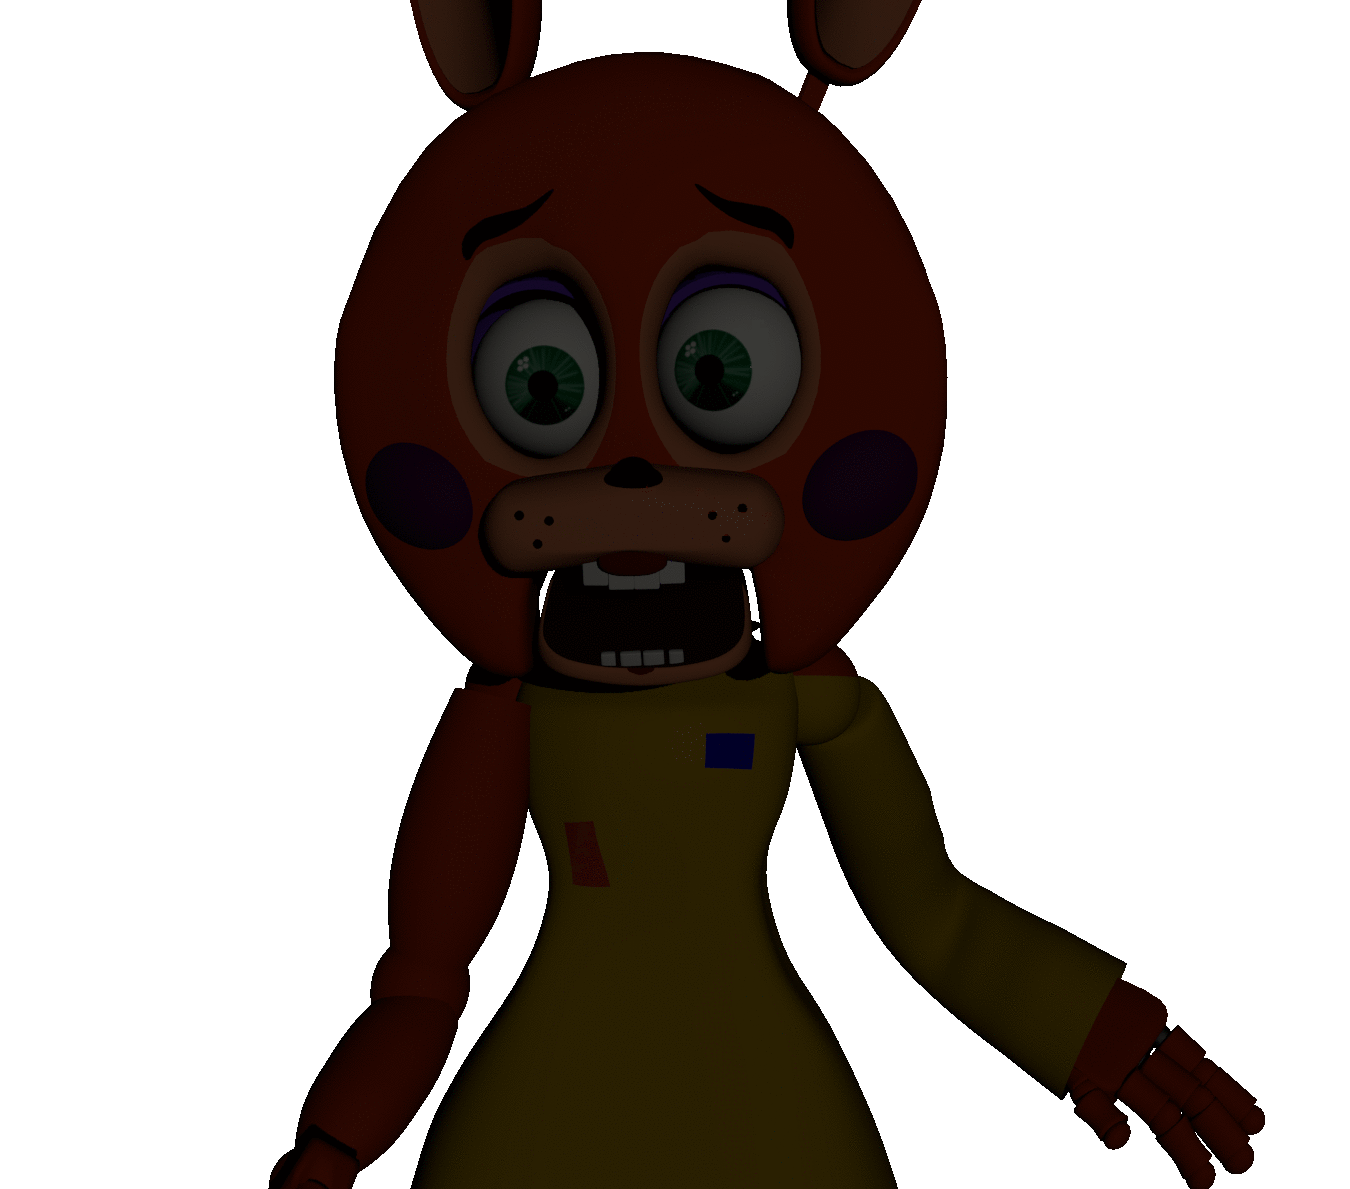 Five Nights In Anime 3 Jumpscares This scrapped jumpscare is... by Apprenticehood on DeviantArt